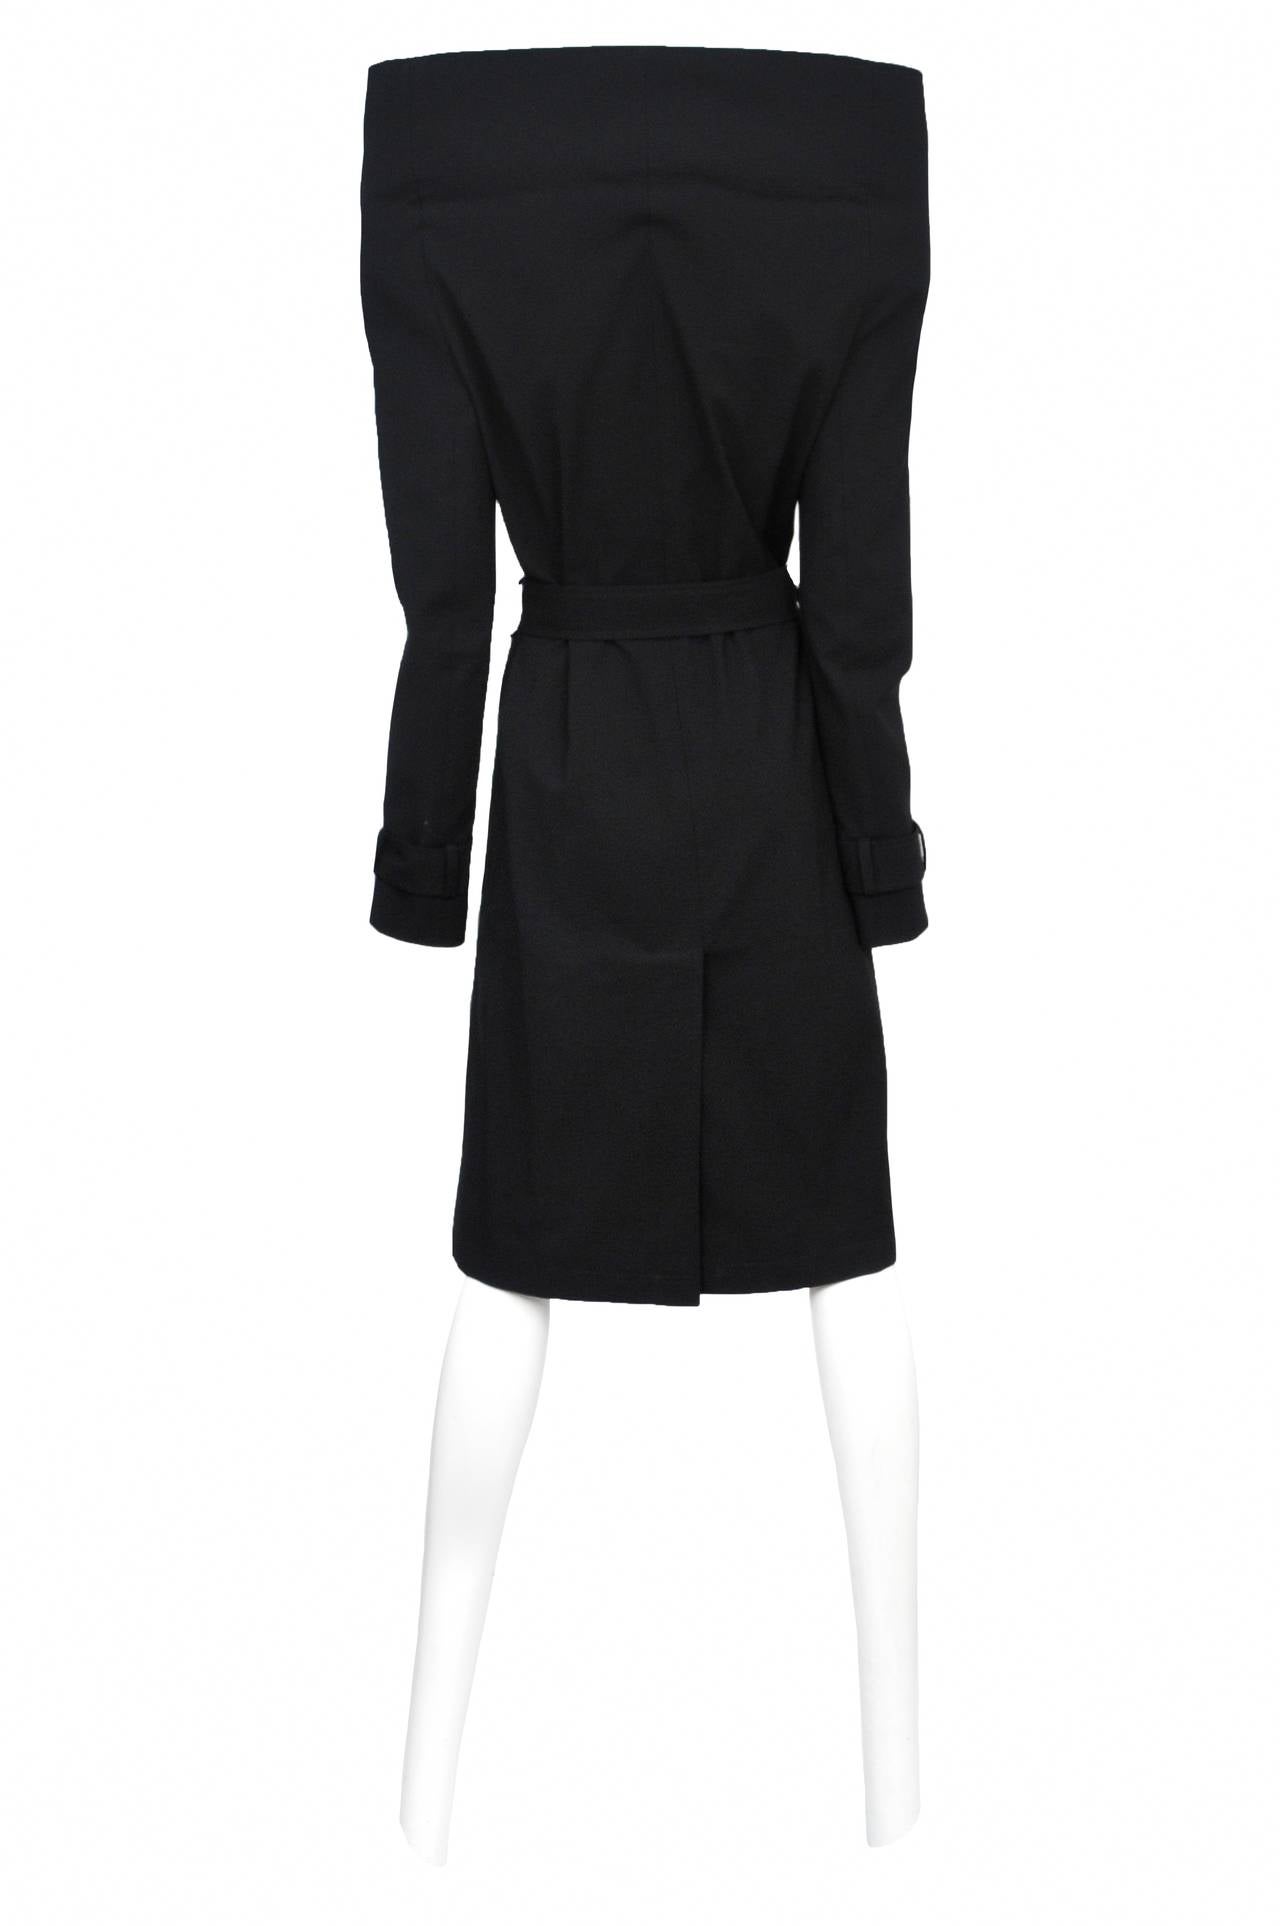 Vintage Margiela iconic black trench coat featuring accentuated shoulder and stand alone collar as well as matching waist belt. Runway piece from the Fall/Winter 2008 Collection.